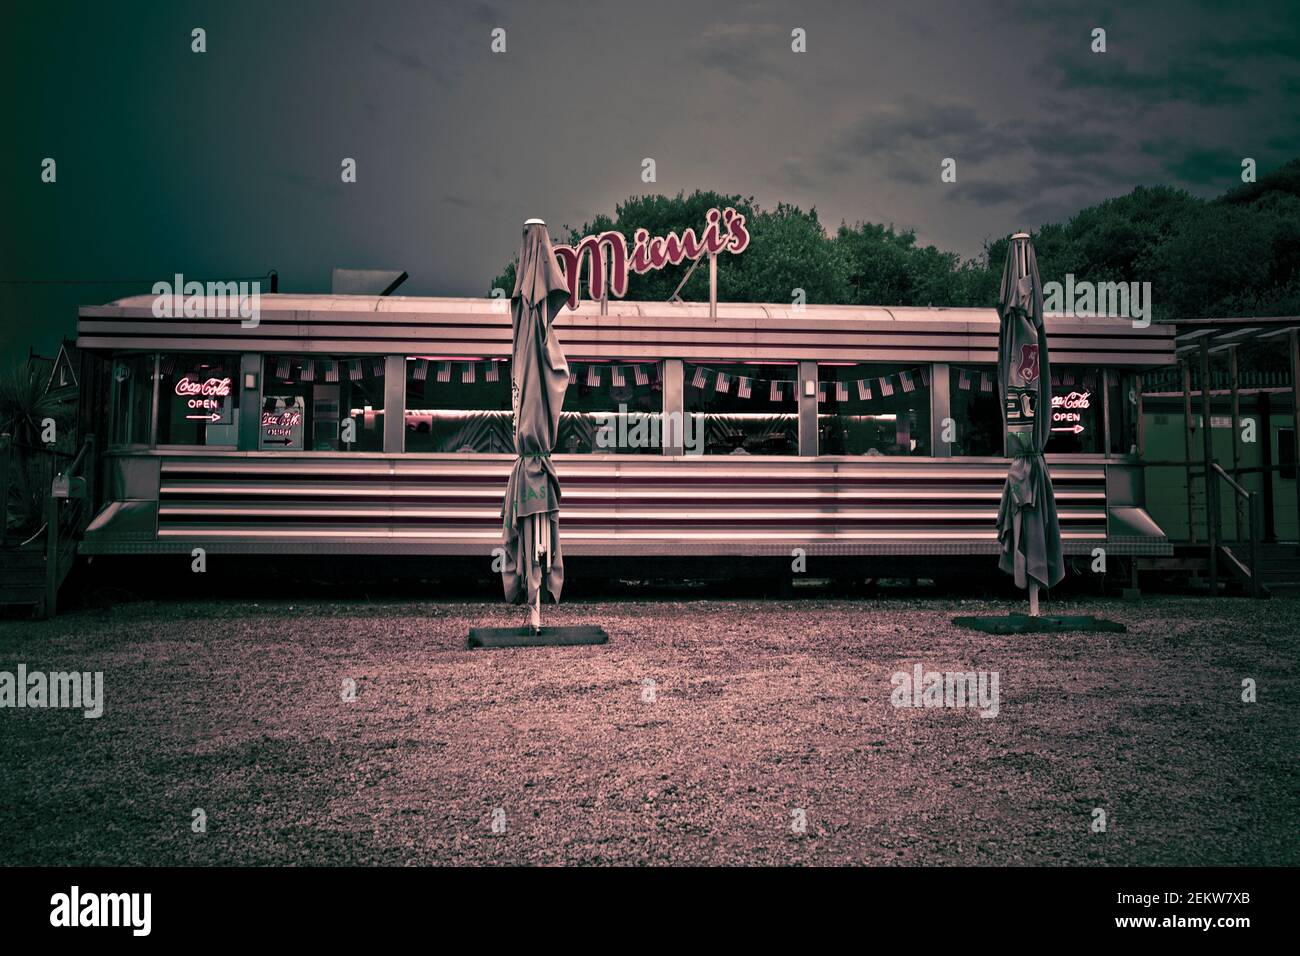 50's diner, dine in, eat out, comfort food, cafe, architectural, buildings, trailer, mid-century, streamliner Stock Photo